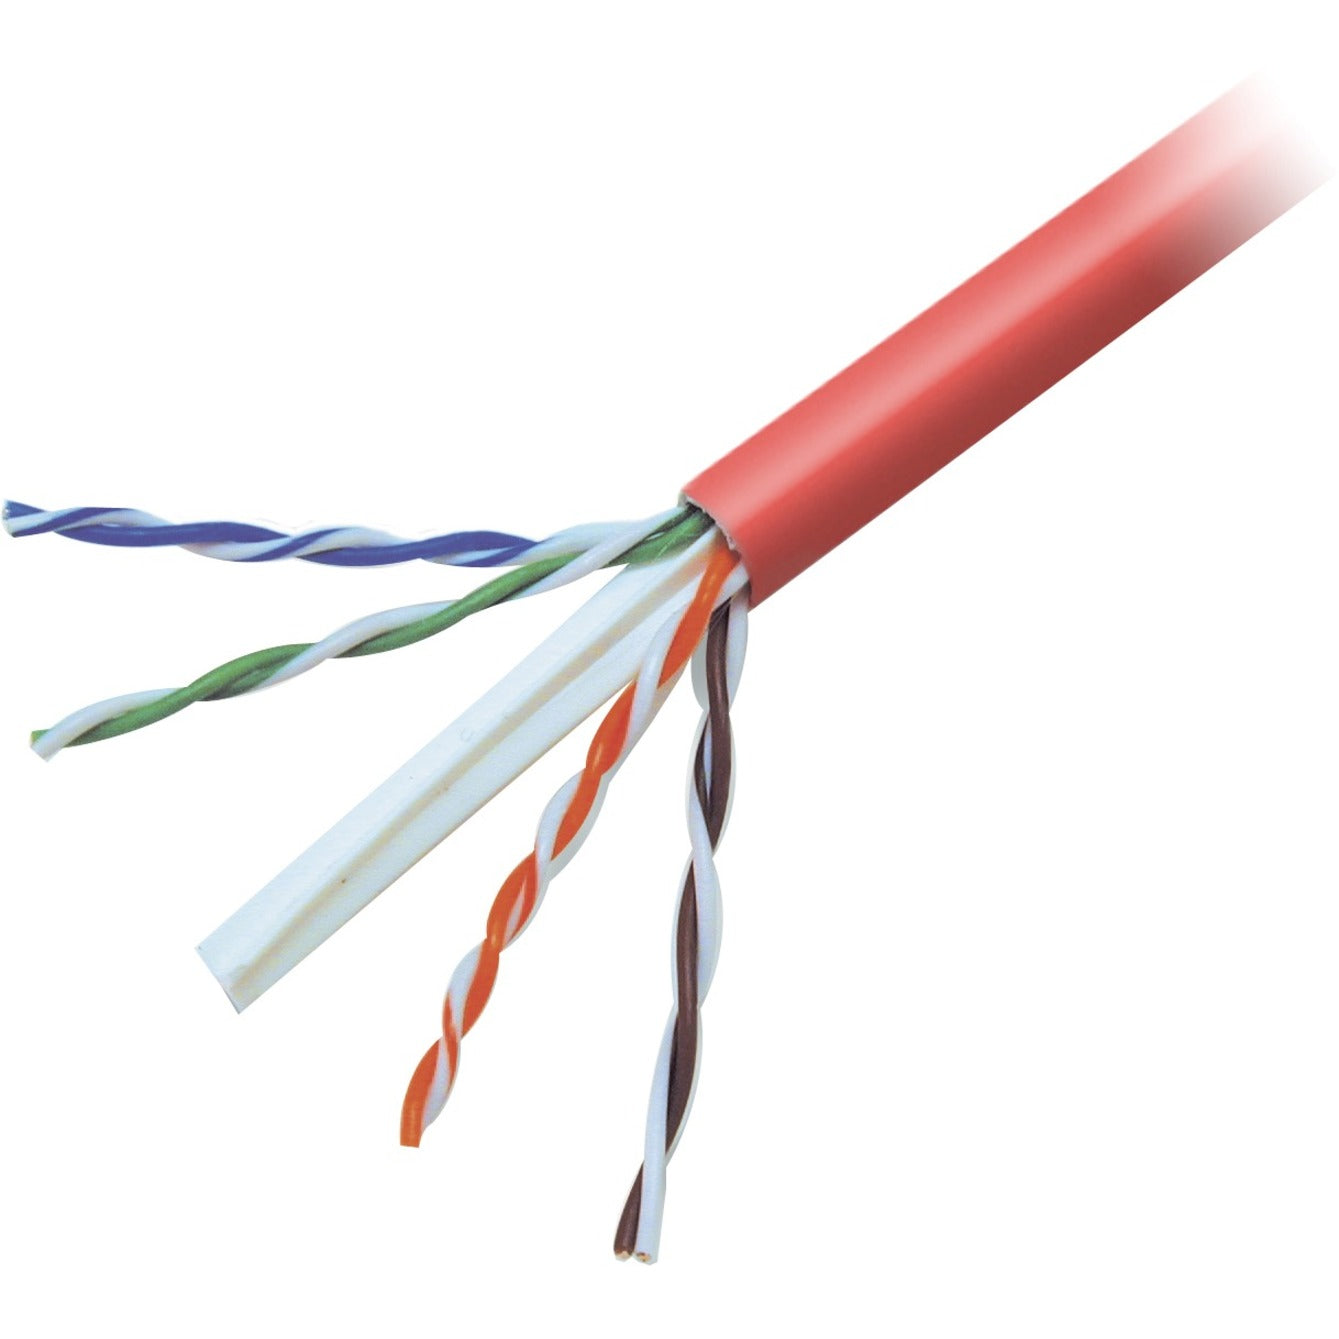 Belkin A7L704-1000-RED Cat6 Patch Cable, 1000ft, Red - High-Speed Network Cable for Reliable Connections